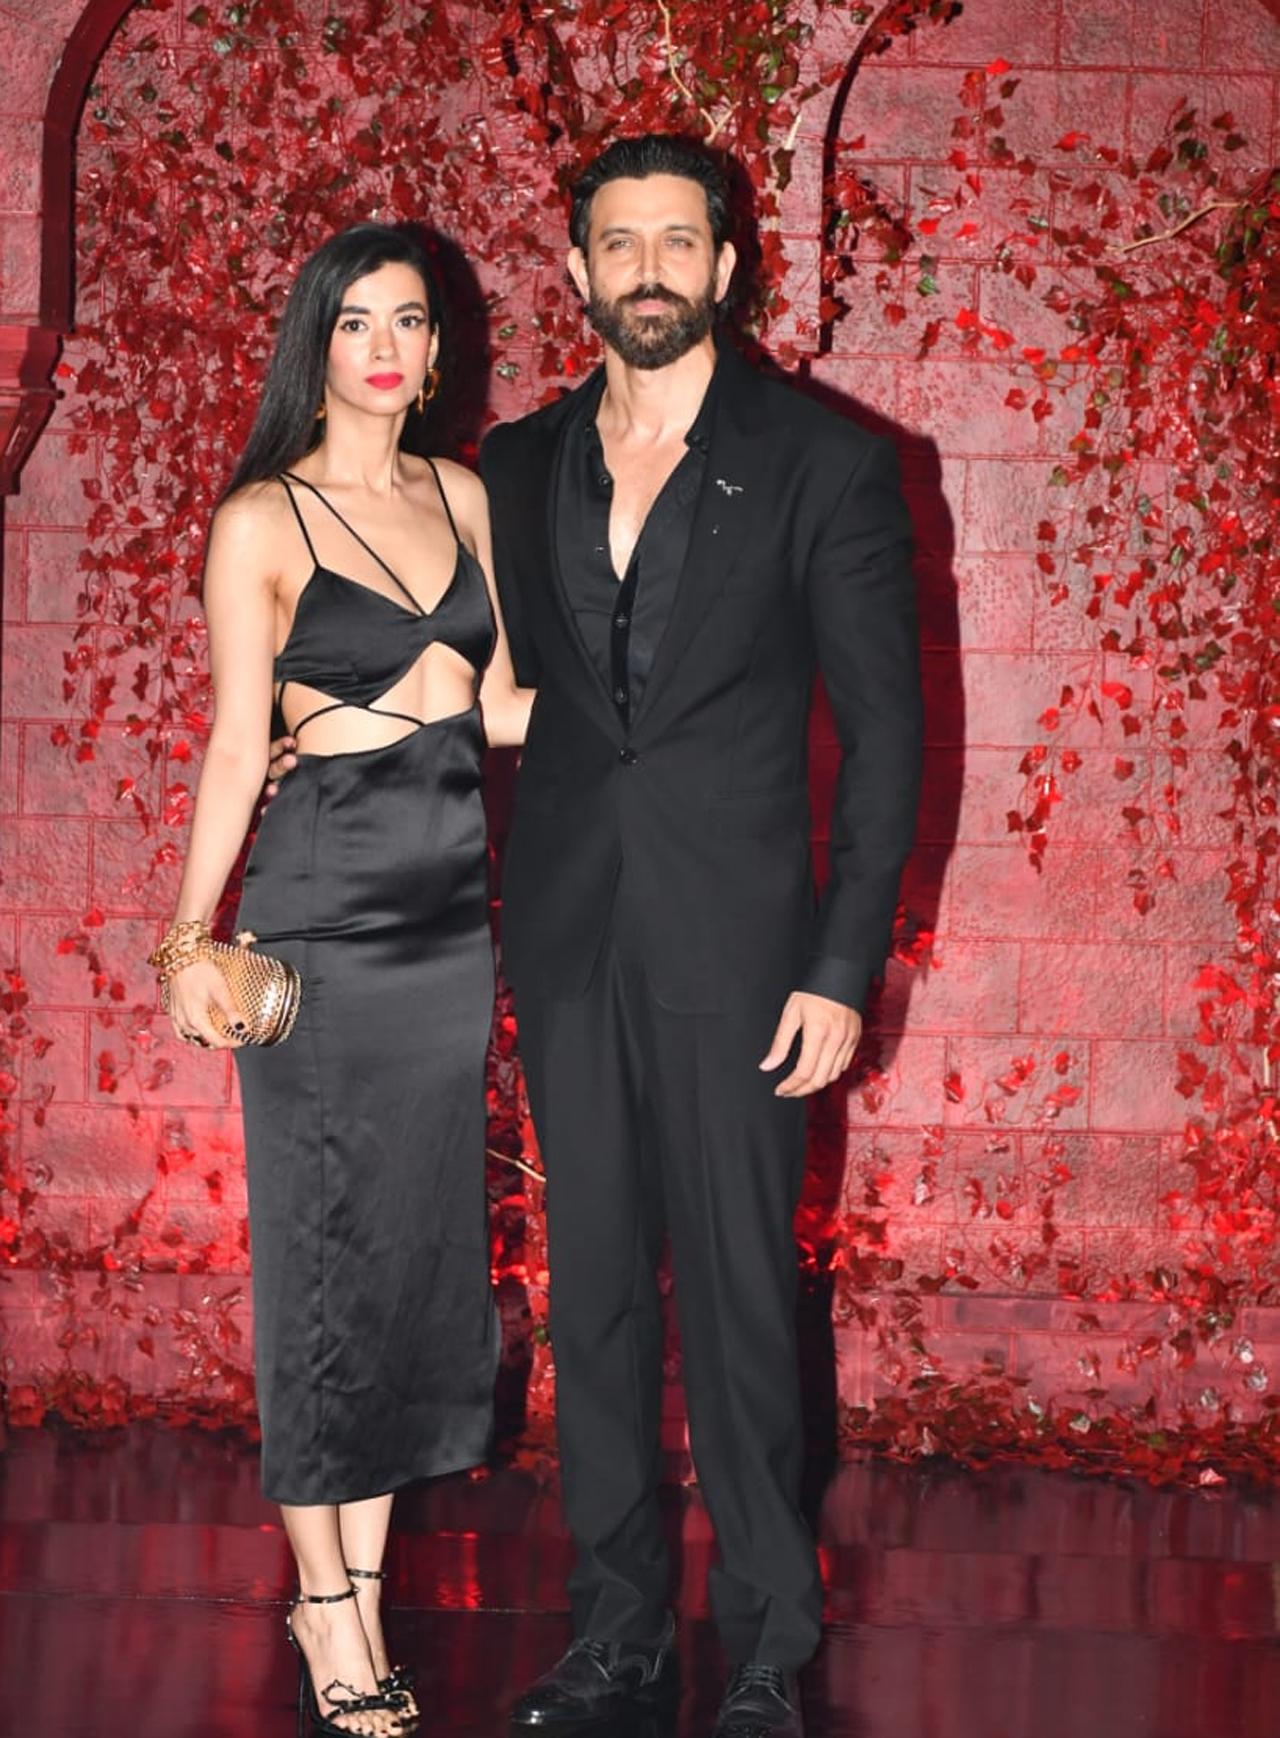 Hrithik Roshan, undoubtedly, stole the spotlight at Karan Johar's 50th birthday bash. He arrived at the party along with his rumoured girlfriend Saba Azad. They made a dashing entry by walking hand-in-hand. The two also posed for shutterbugs gathered outside the party venue. In one of the viral videos, Hrithik is seen introducing sweetly introducing Saba to guests by telling them her name.